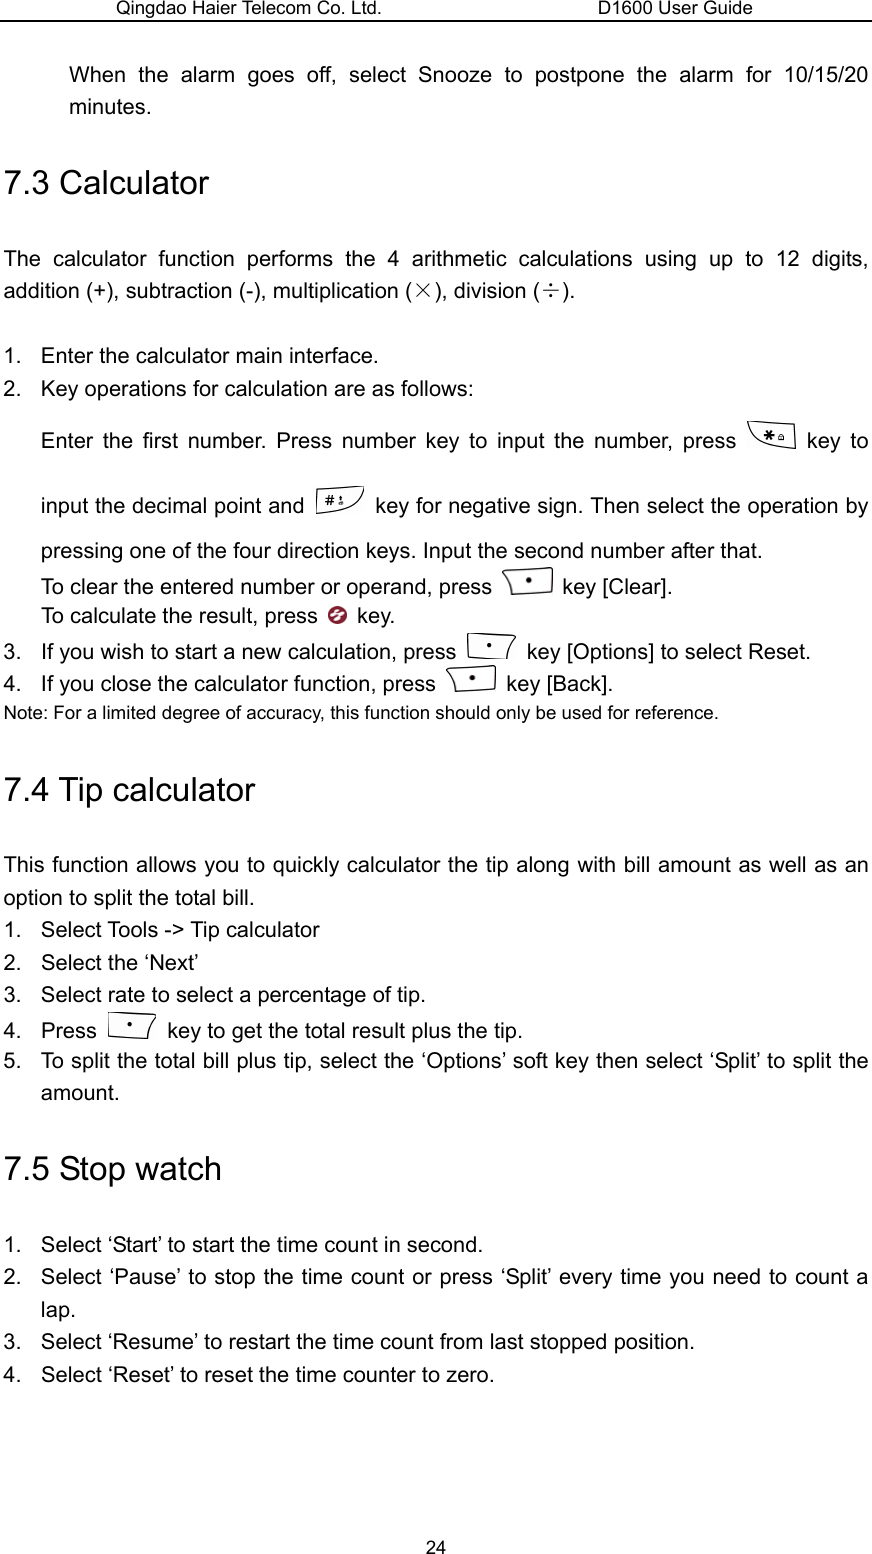 Qingdao Haier Telecom Co. Ltd.                       D1600 User Guide When the alarm goes off, select Snooze to postpone the alarm for 10/15/20 minutes. 7.3 Calculator The calculator function performs the 4 arithmetic calculations using up to 12 digits, addition (+), subtraction (-), multiplication (×), division (÷).  1.  Enter the calculator main interface. 2.  Key operations for calculation are as follows: Enter the first number. Press number key to input the number, press   key to input the decimal point and    key for negative sign. Then select the operation by pressing one of the four direction keys. Input the second number after that. To clear the entered number or operand, press   key [Clear]. To calculate the result, press   key. 3.  If you wish to start a new calculation, press    key [Options] to select Reset. 4.  If you close the calculator function, press   key [Back]. Note: For a limited degree of accuracy, this function should only be used for reference. 7.4 Tip calculator This function allows you to quickly calculator the tip along with bill amount as well as an option to split the total bill. 1. Select Tools -&gt; Tip calculator 2.  Select the ‘Next’ 3.  Select rate to select a percentage of tip. 4. Press    key to get the total result plus the tip. 5.  To split the total bill plus tip, select the ‘Options’ soft key then select ‘Split’ to split the amount. 7.5 Stop watch 1.  Select ‘Start’ to start the time count in second. 2.  Select ‘Pause’ to stop the time count or press ‘Split’ every time you need to count a lap. 3.  Select ‘Resume’ to restart the time count from last stopped position. 4.  Select ‘Reset’ to reset the time counter to zero. 24 